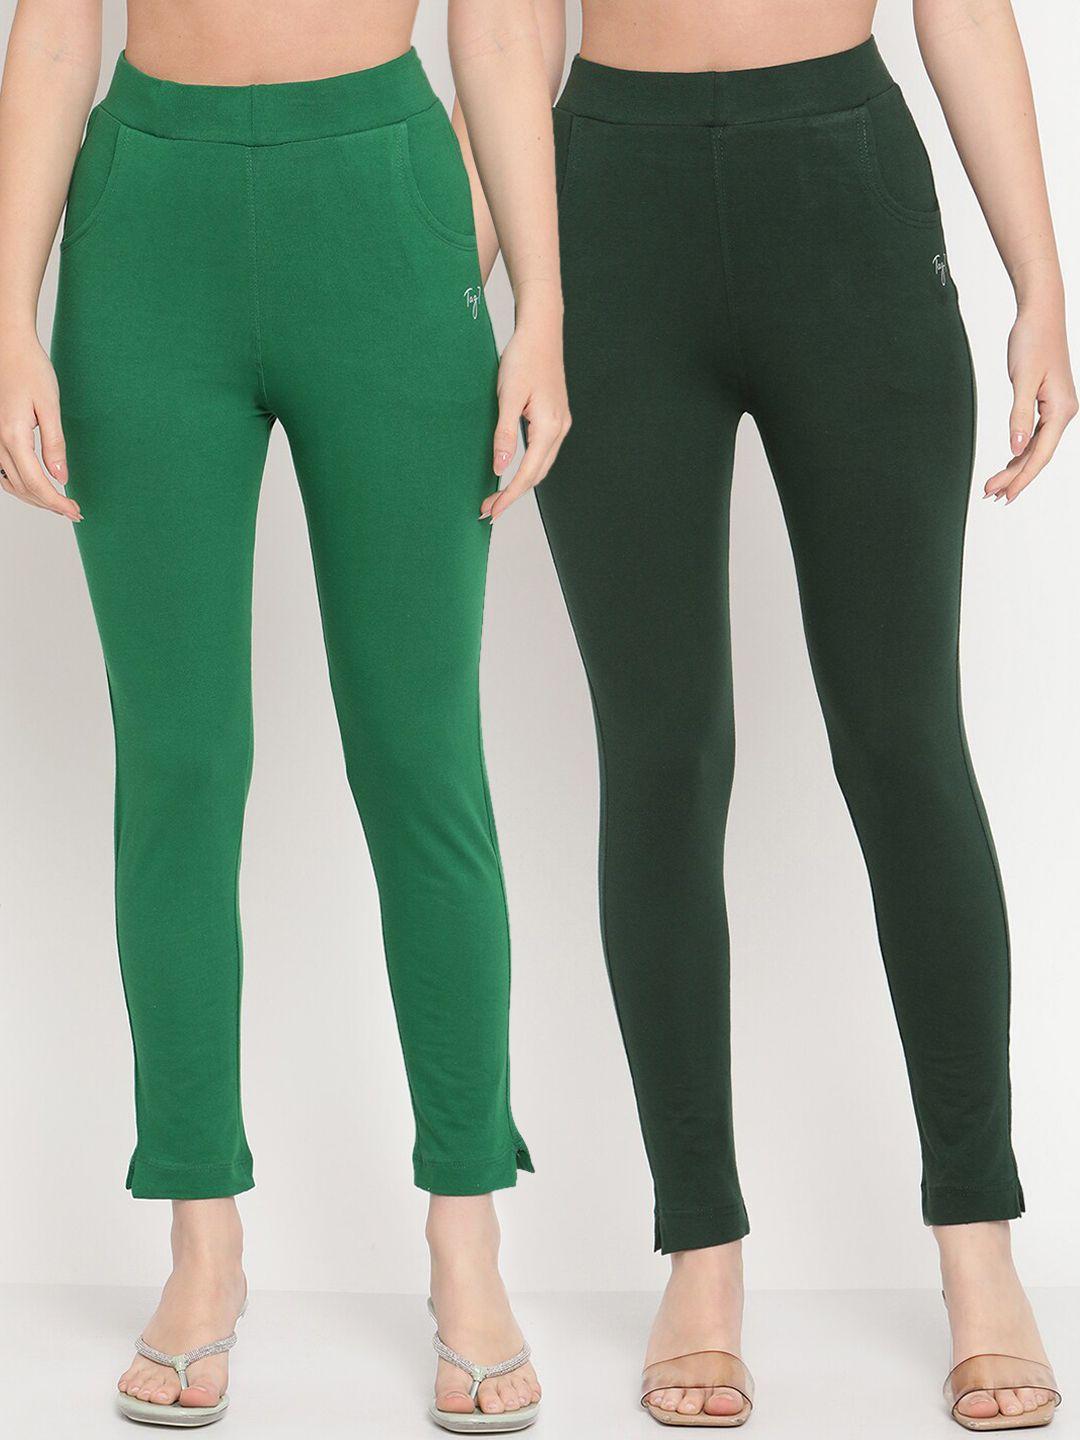 tag 7 pack of 2 olive green & green ankle-length leggings